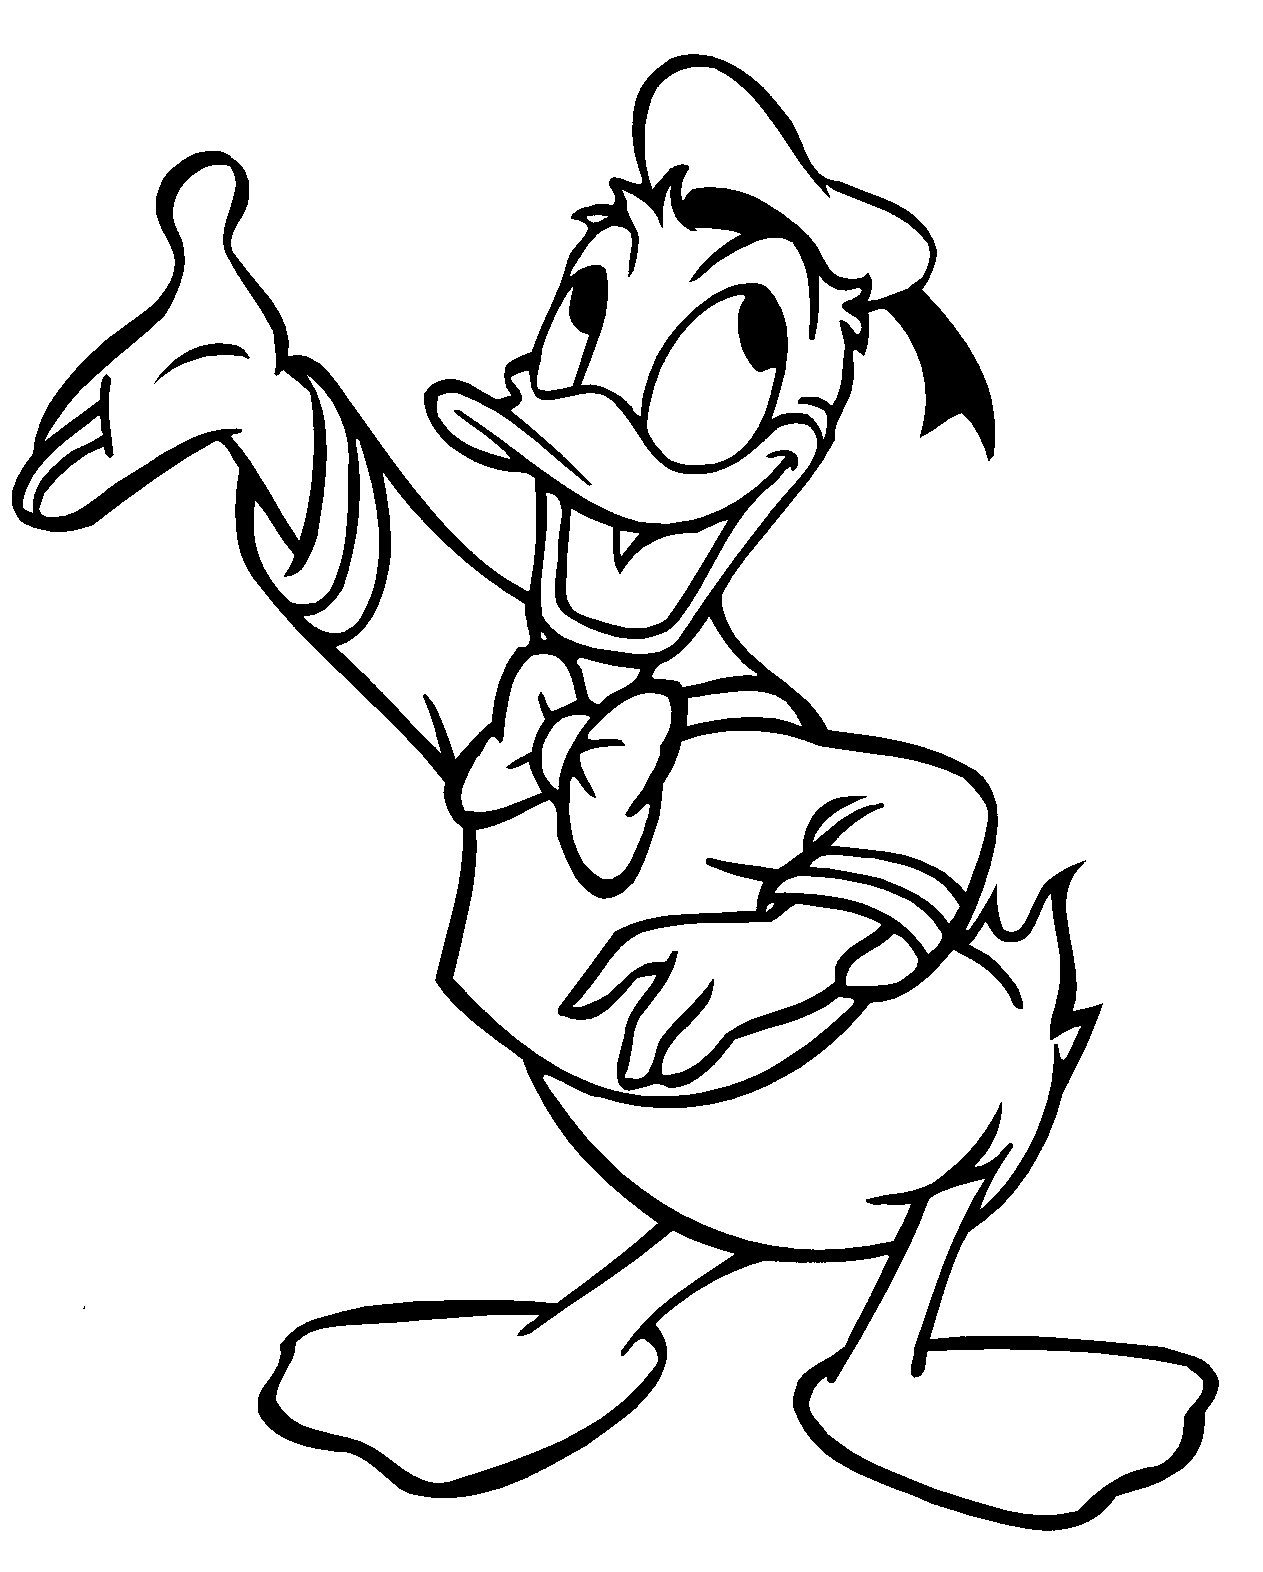 Donald Duck Coloring Pages Cartoons Donald Duck To Print 2 Printable 2020 2592 Coloring4free